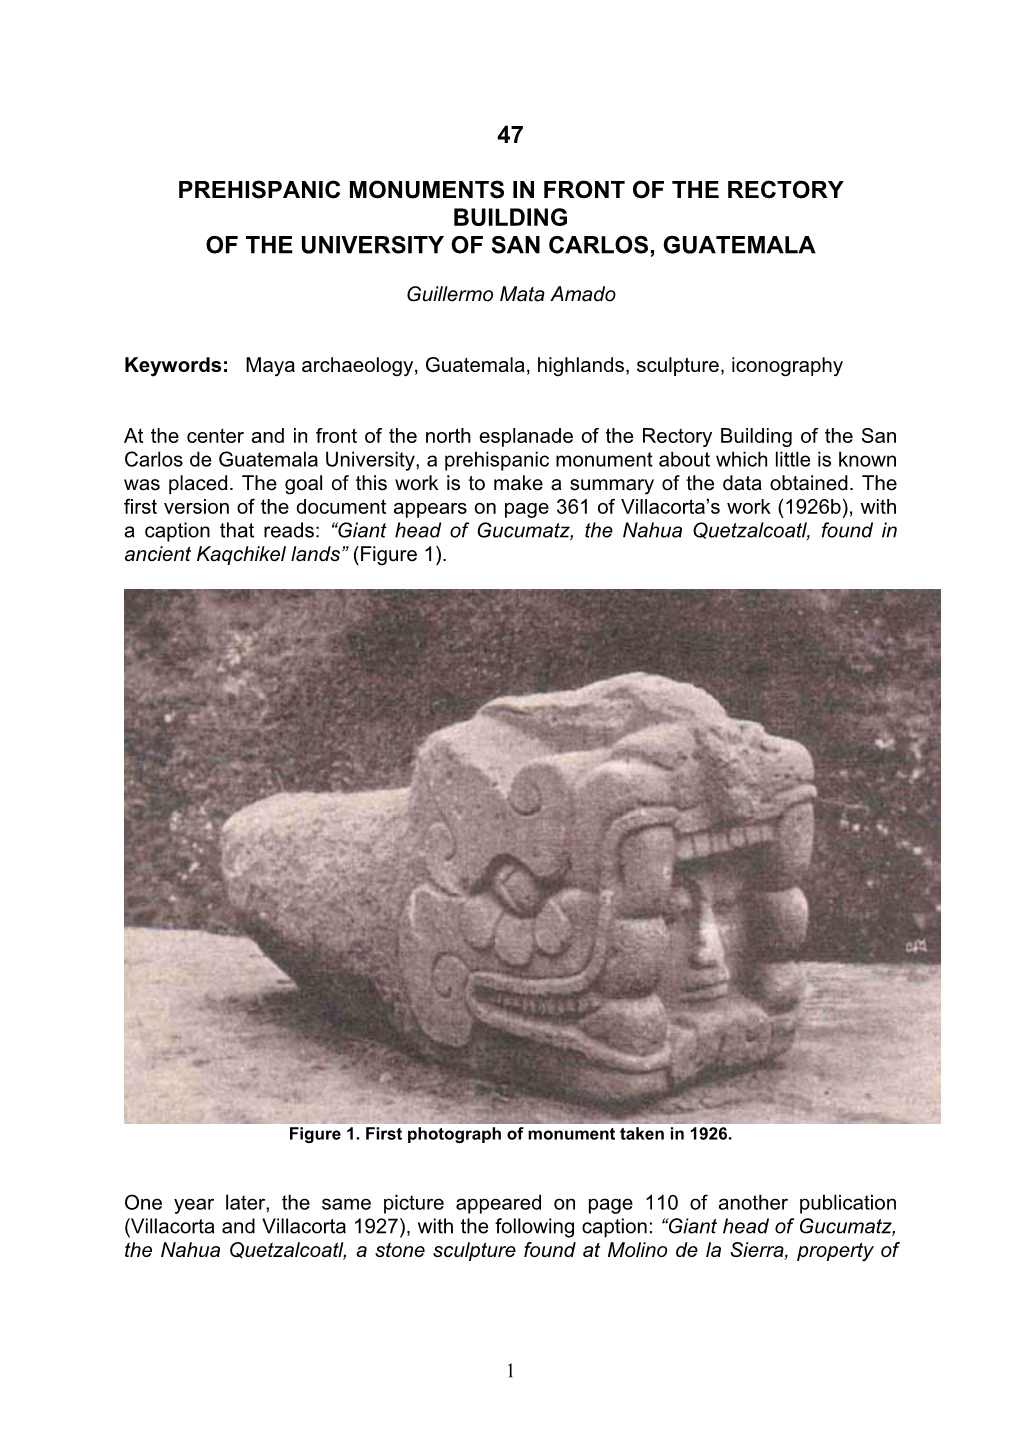 47 Prehispanic Monuments in Front of the Rectory Building of the University of San Carlos, Guatemala